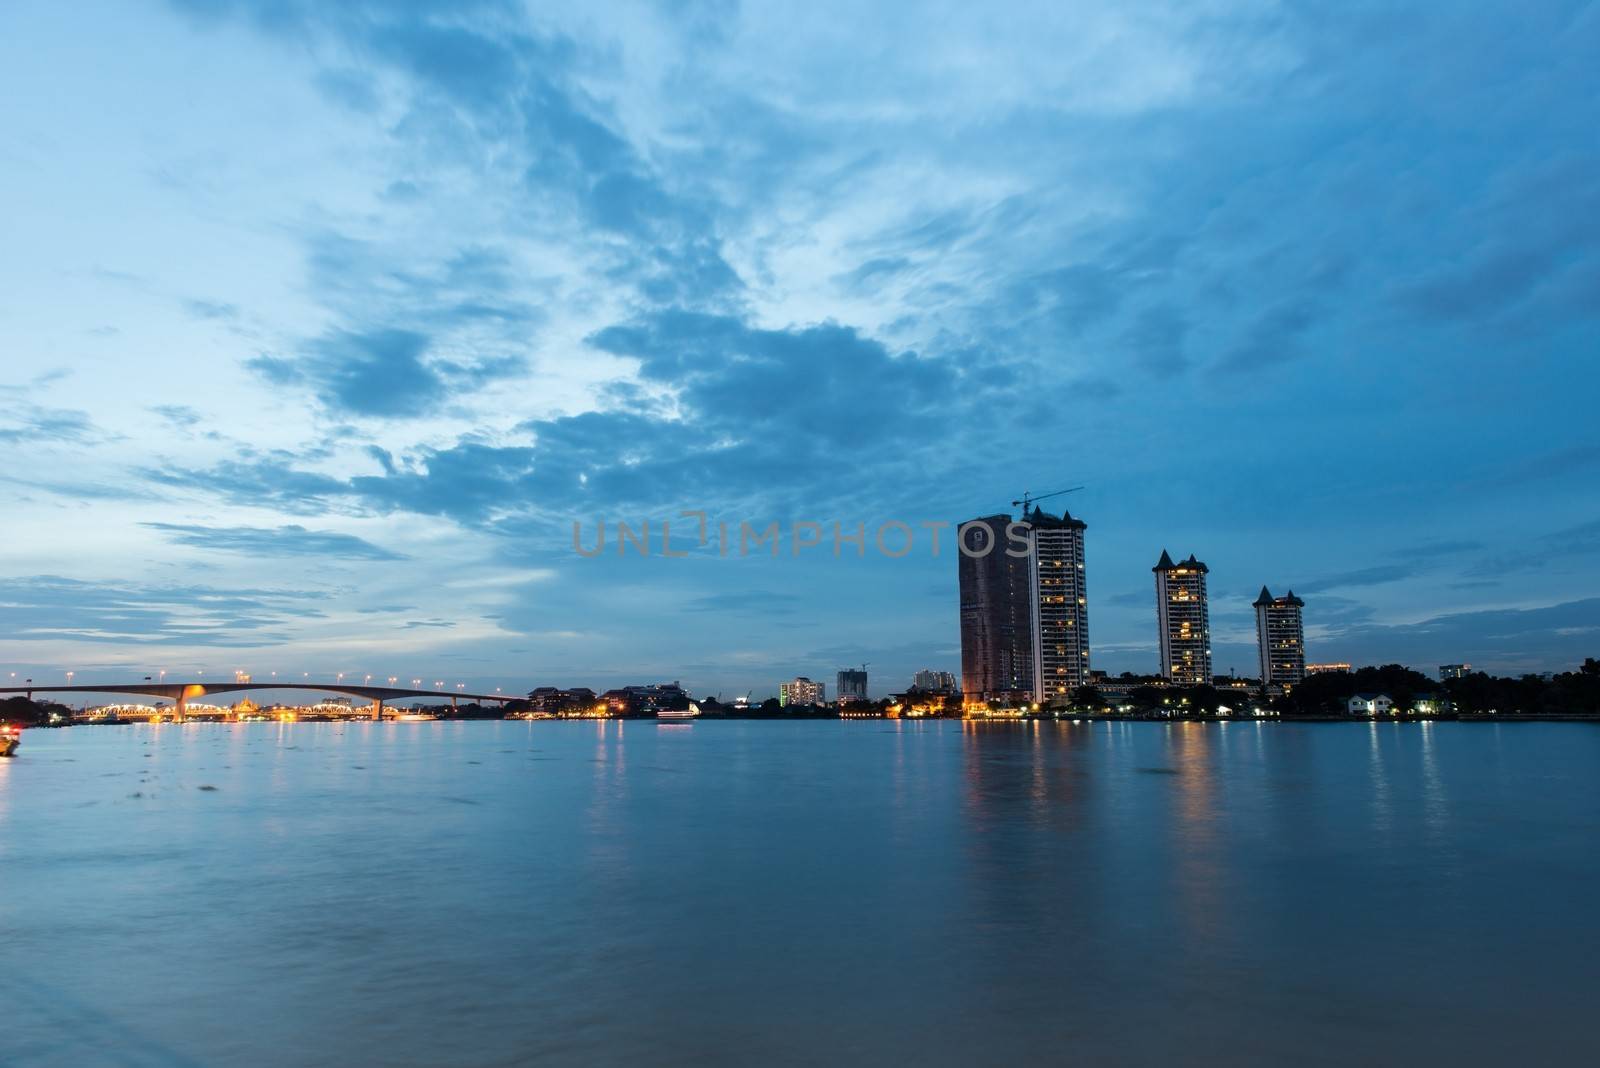 Bangkok city scape, taken at twilight zone on a cloudy day